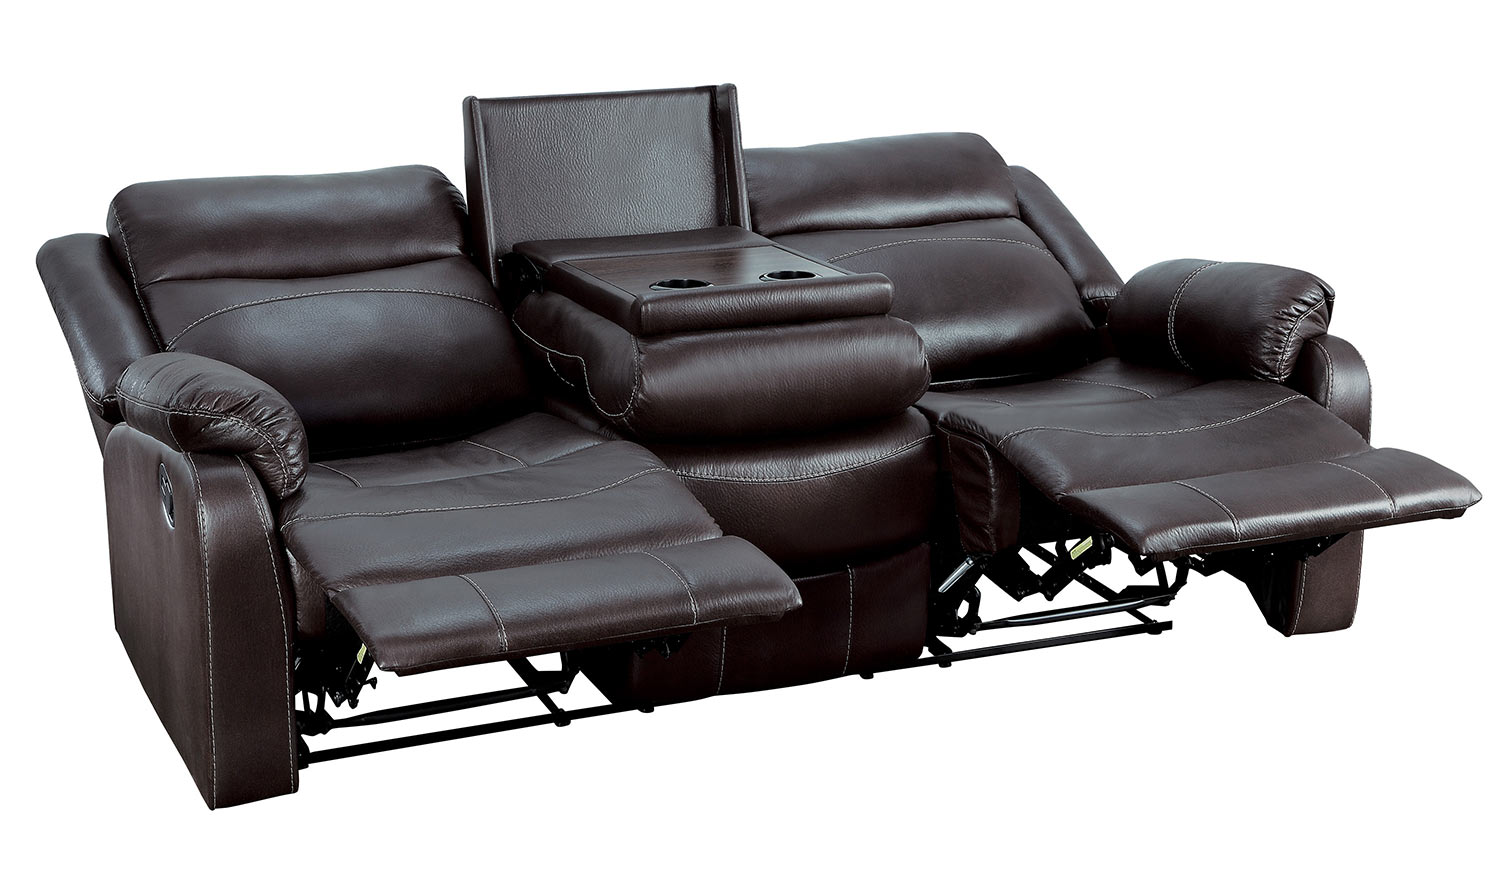 Homelegance Yerba Double Lay Flat Reclining Sofa With Center Drop-Down Cup Holders - Dark Brown